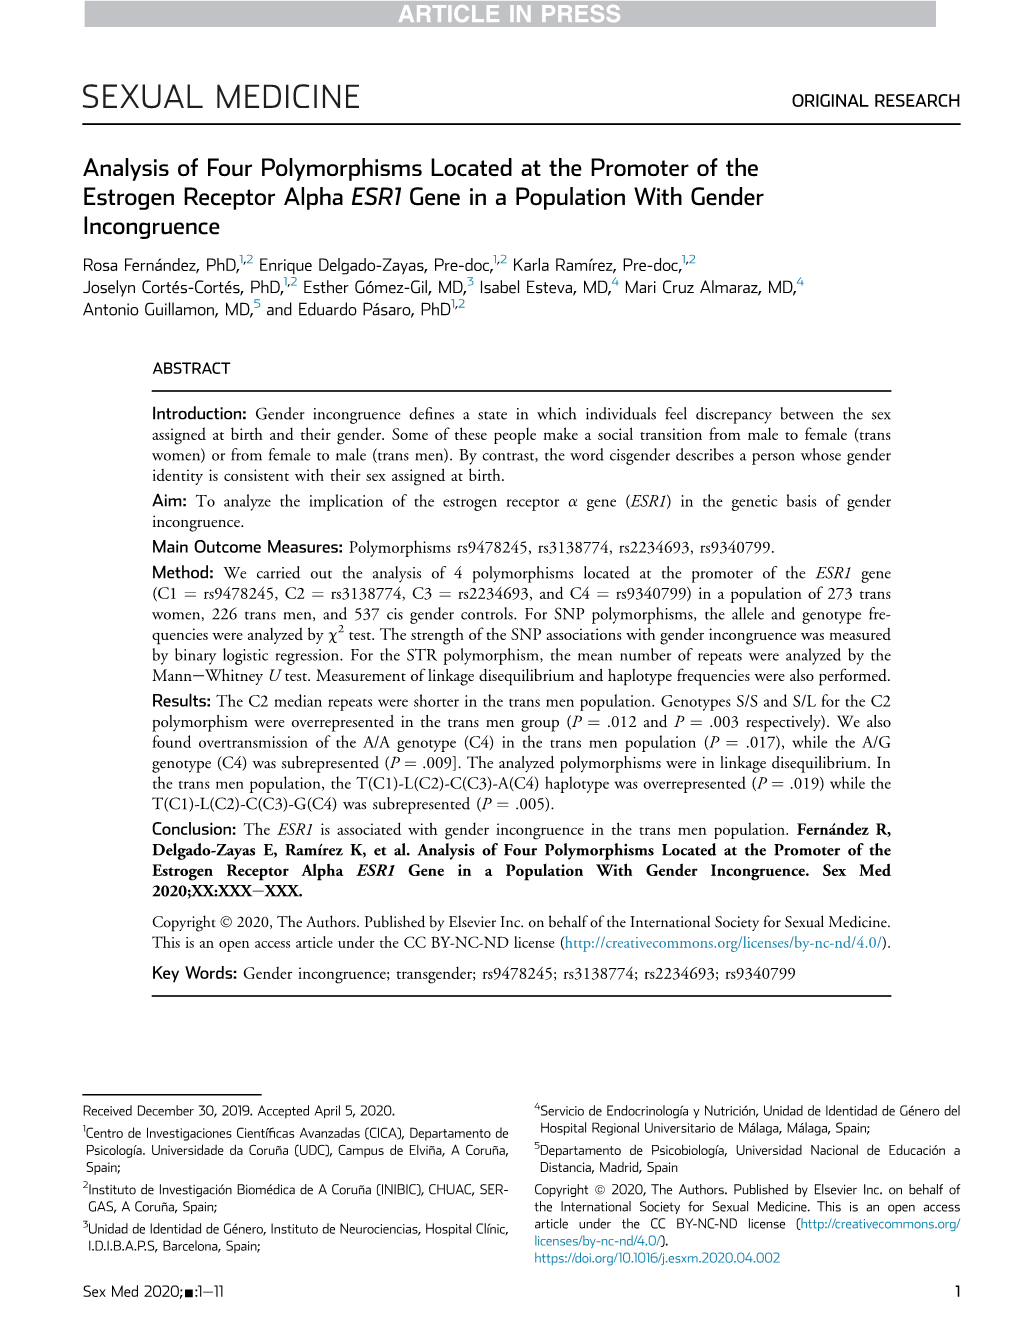 Analysis of Four Polymorphisms Located at the Promoter of the Estrogen Receptor Alpha ESR1 Gene in a Population with Gender Incongruence